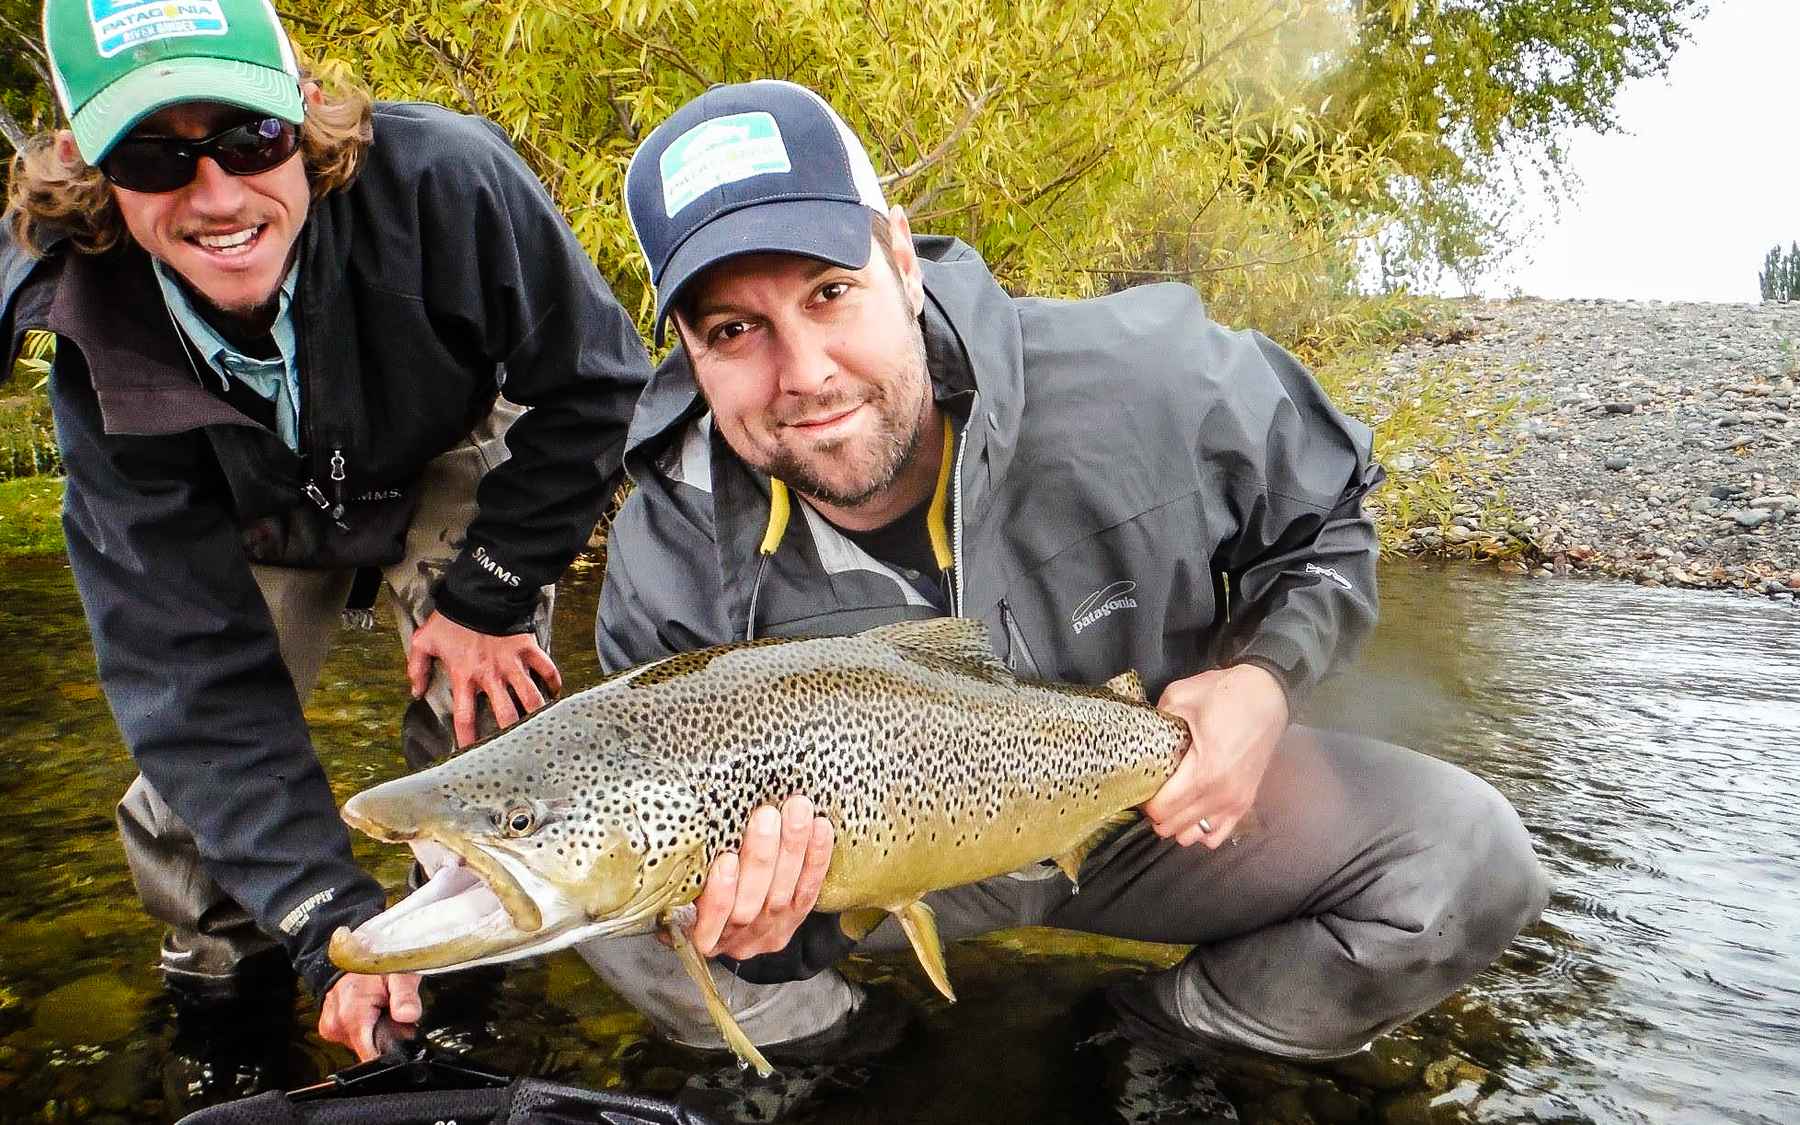 http://www.hatchmag.com/sites/default/files/styles/extra-large/public/field/image/12177518_10208061099346200_490833797_o-2.jpg